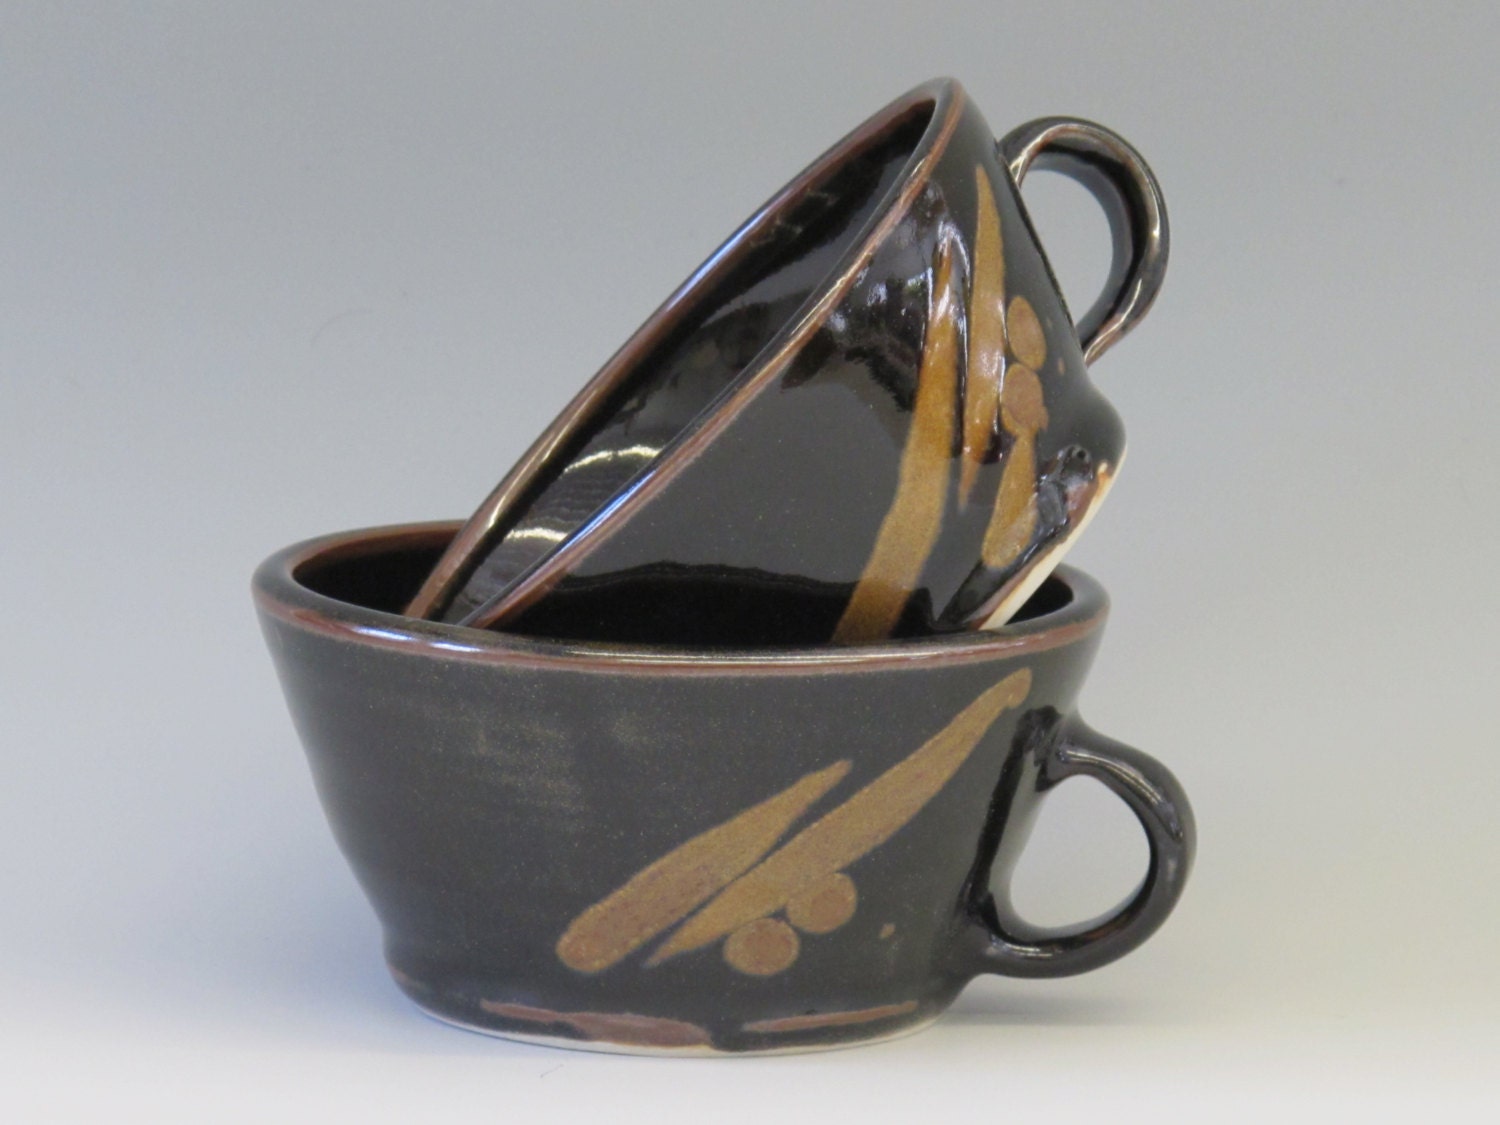 Soup bowl with handle in Brown Tenmoku glaze with Gold flecks and decoration - NewProspectPottery